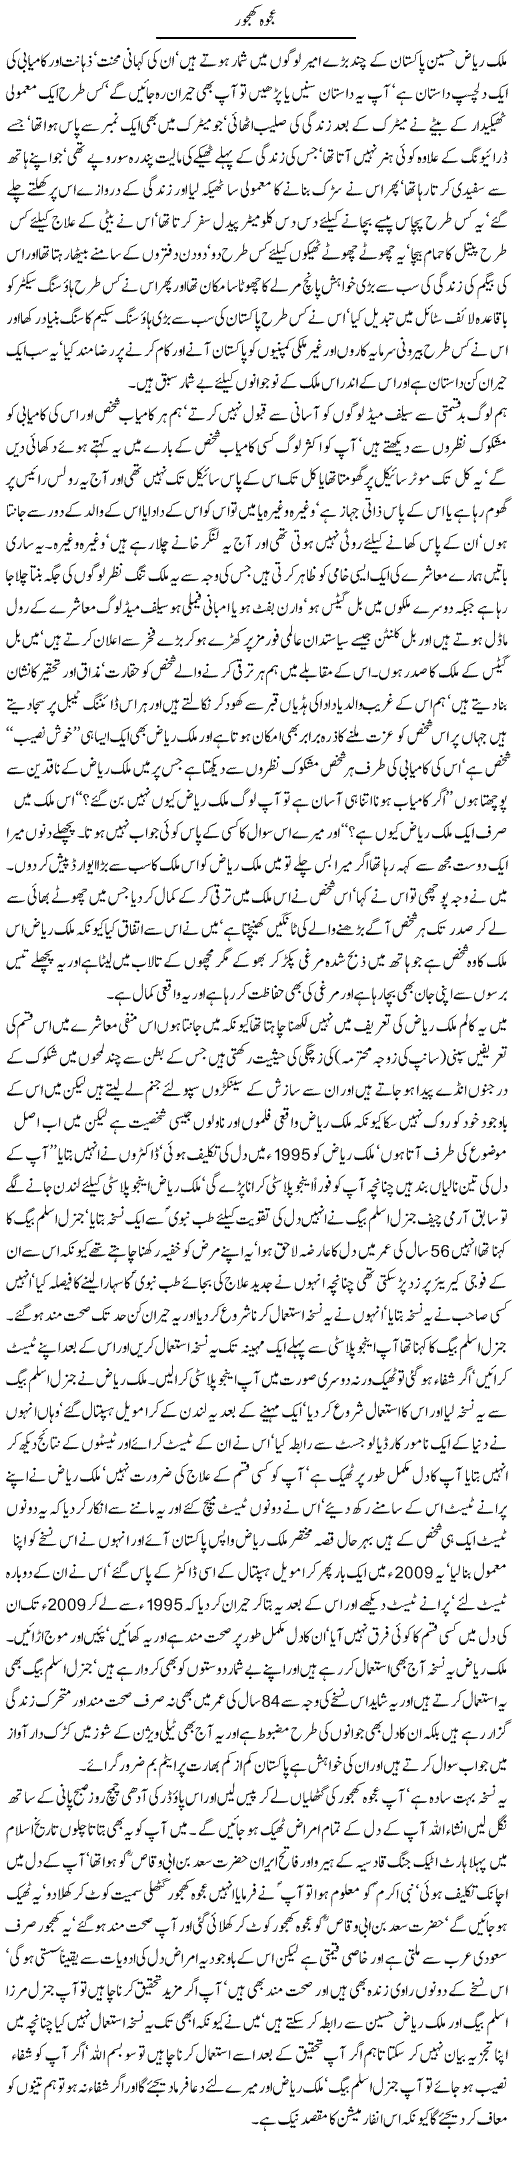 Date Express Column Javed Chaudhry 23 December 2010